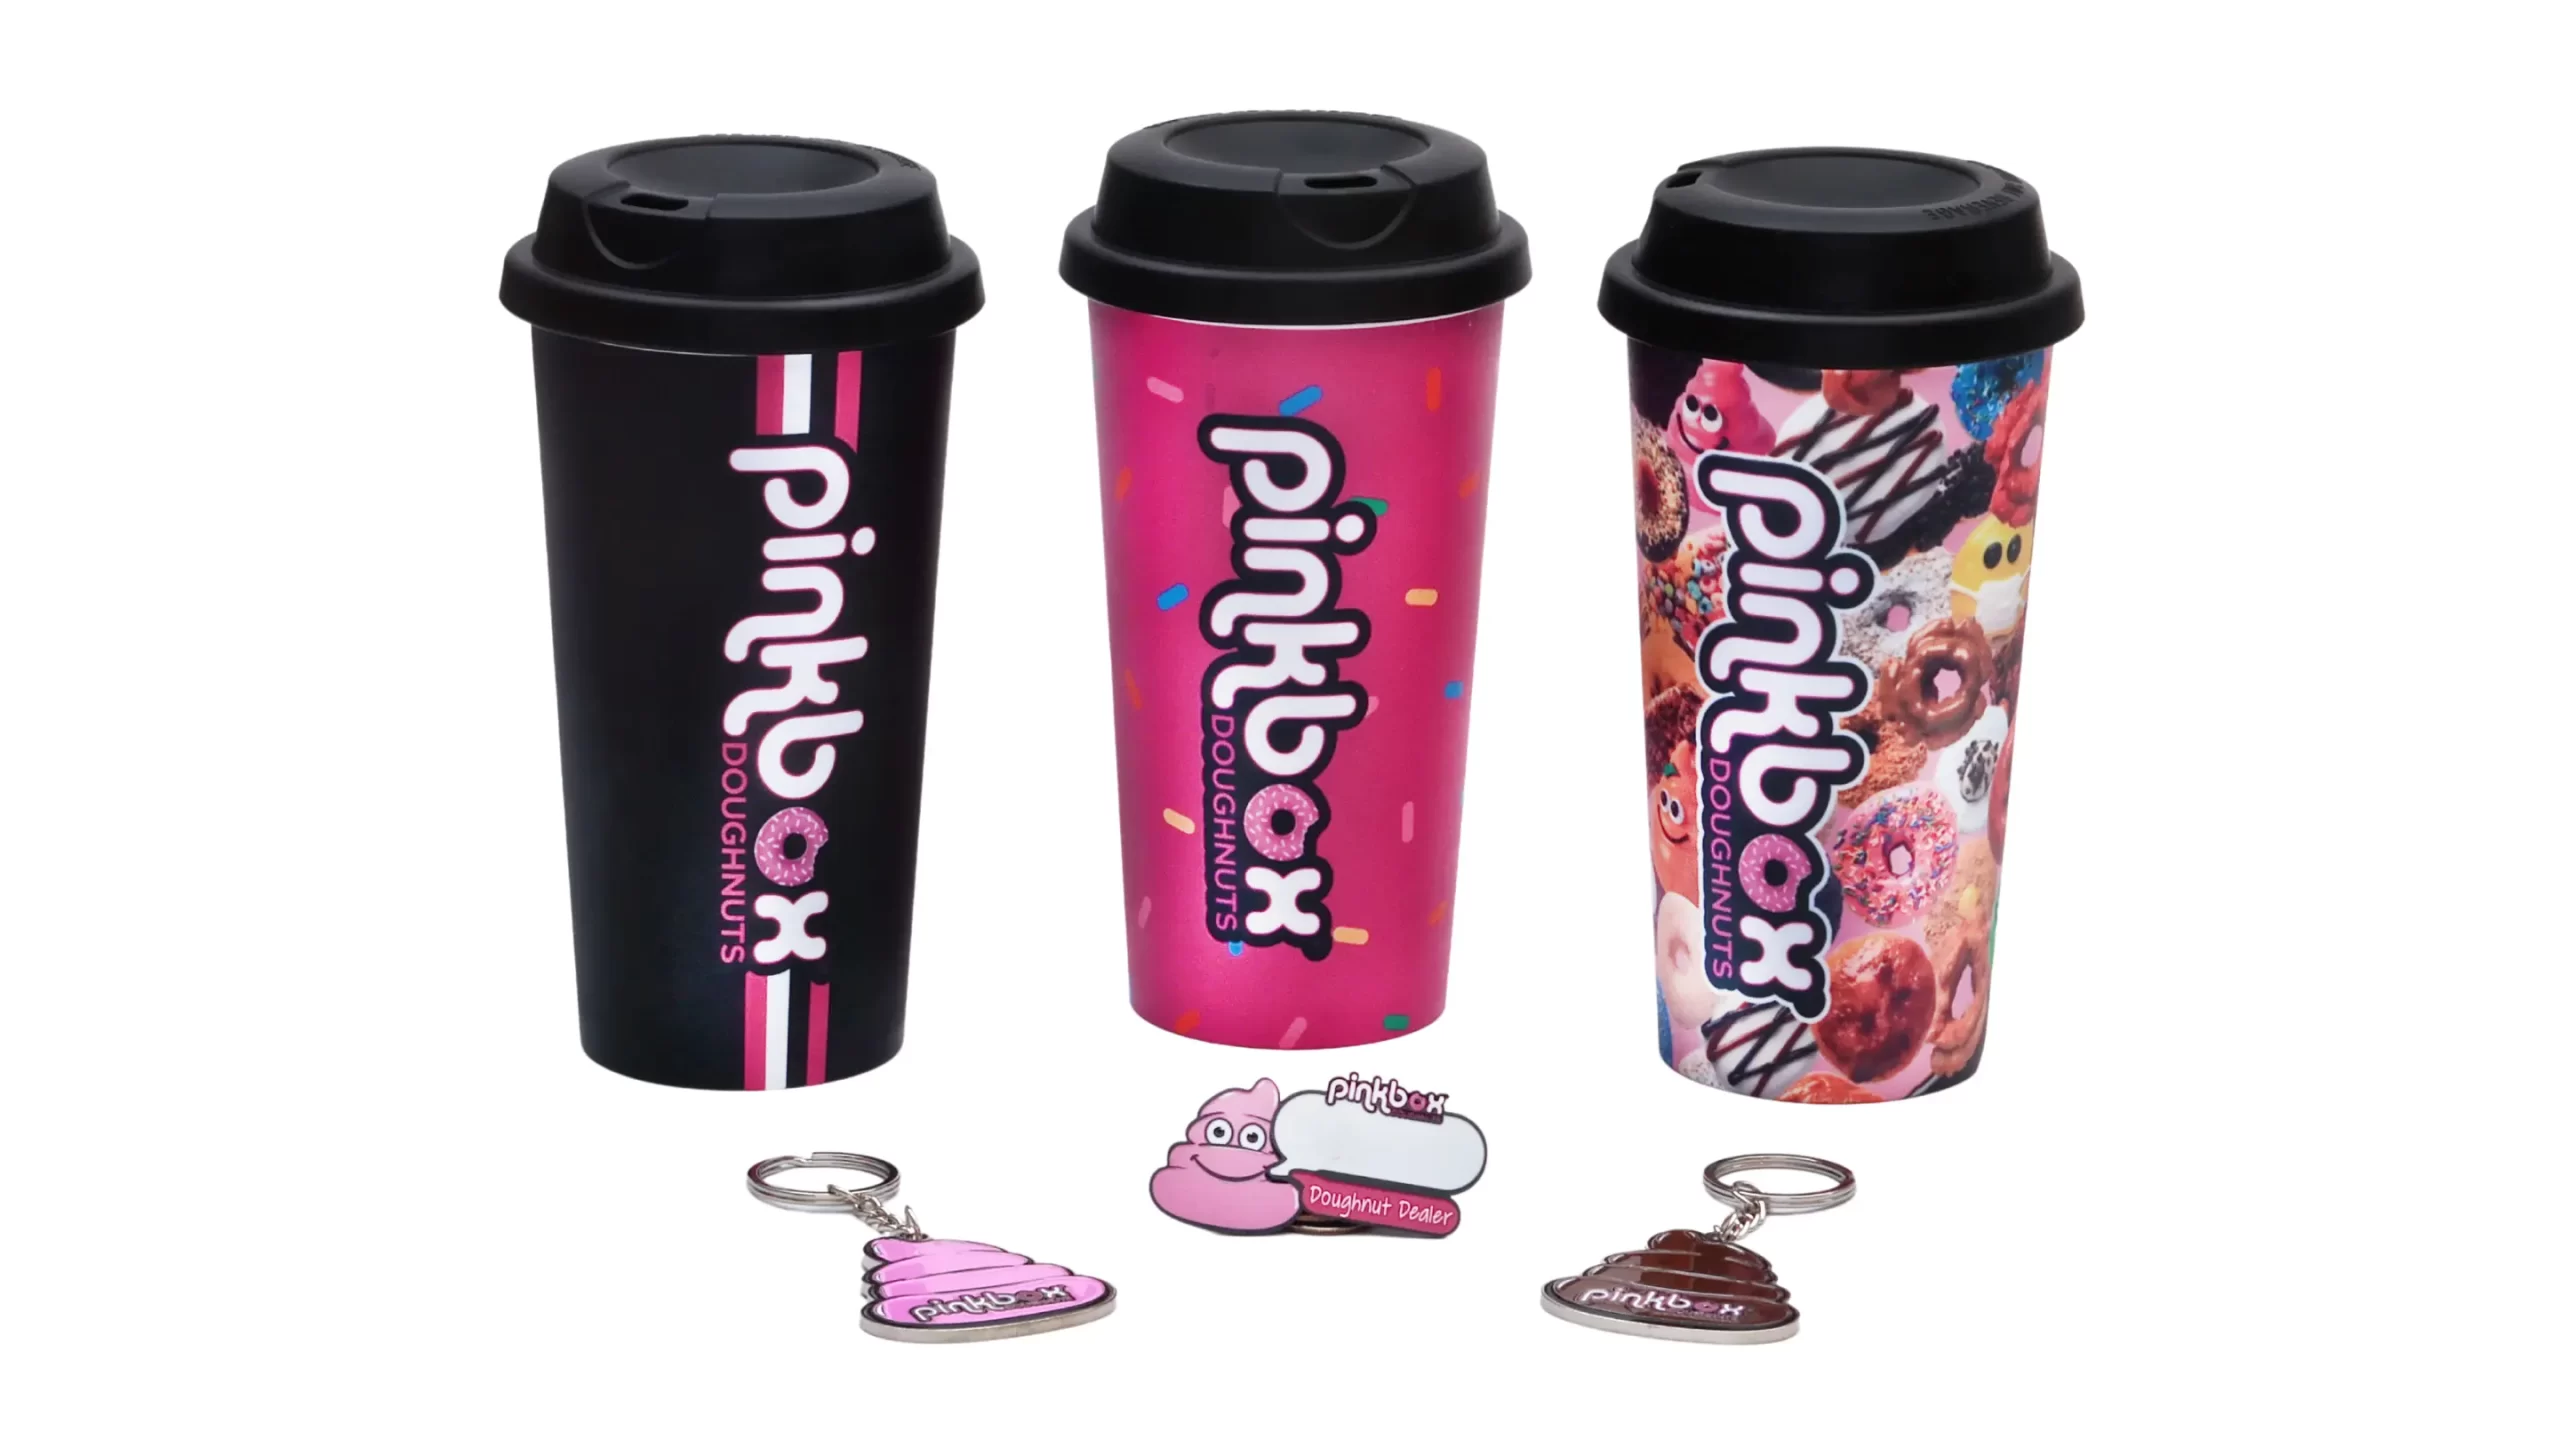 Pinkbox Doughnuts, voted "Best of Las Vegas" for the most unusual gourmet doughnuts, had us create a group of unique, full color reusable "collectible" tumblers. We also make their staff badges and retail keychains.